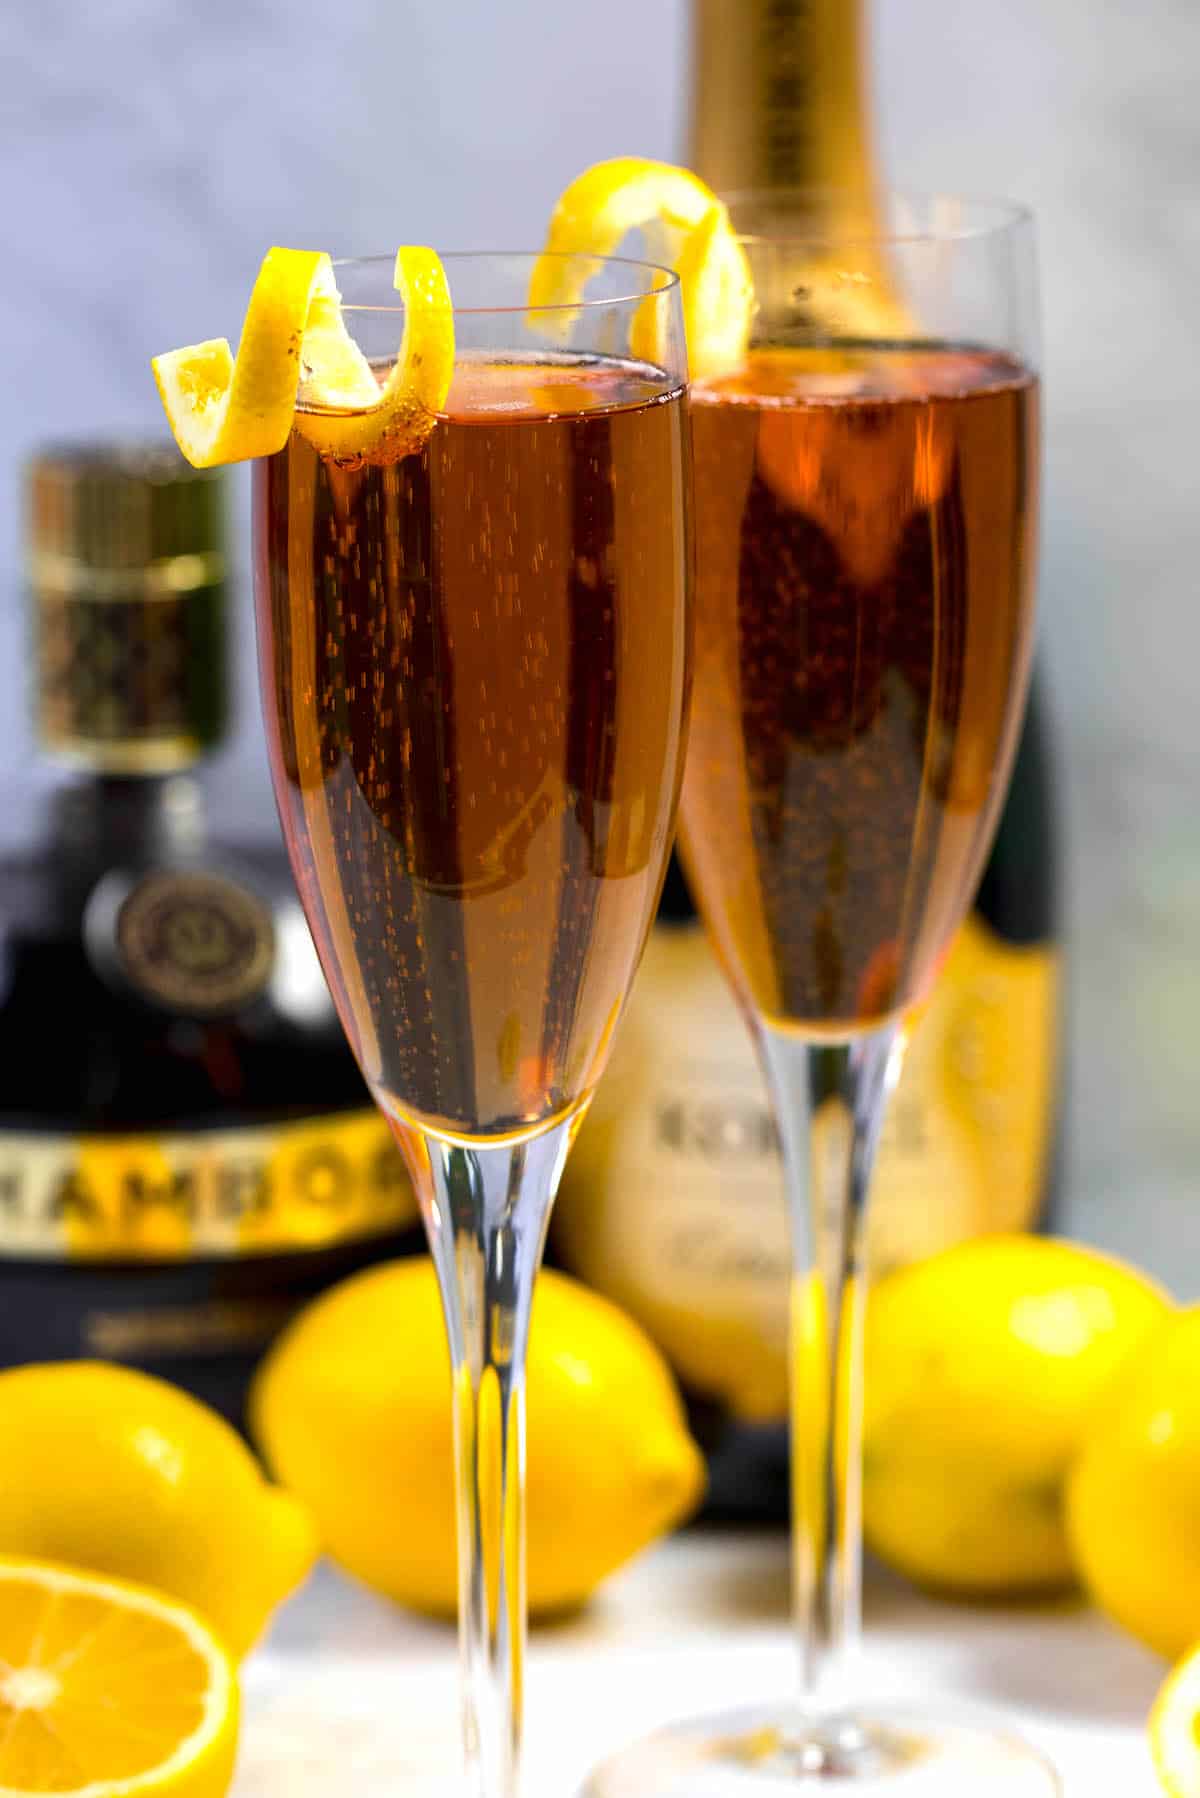 two glasses on Kir royale champagne with a lemon peel on the rim